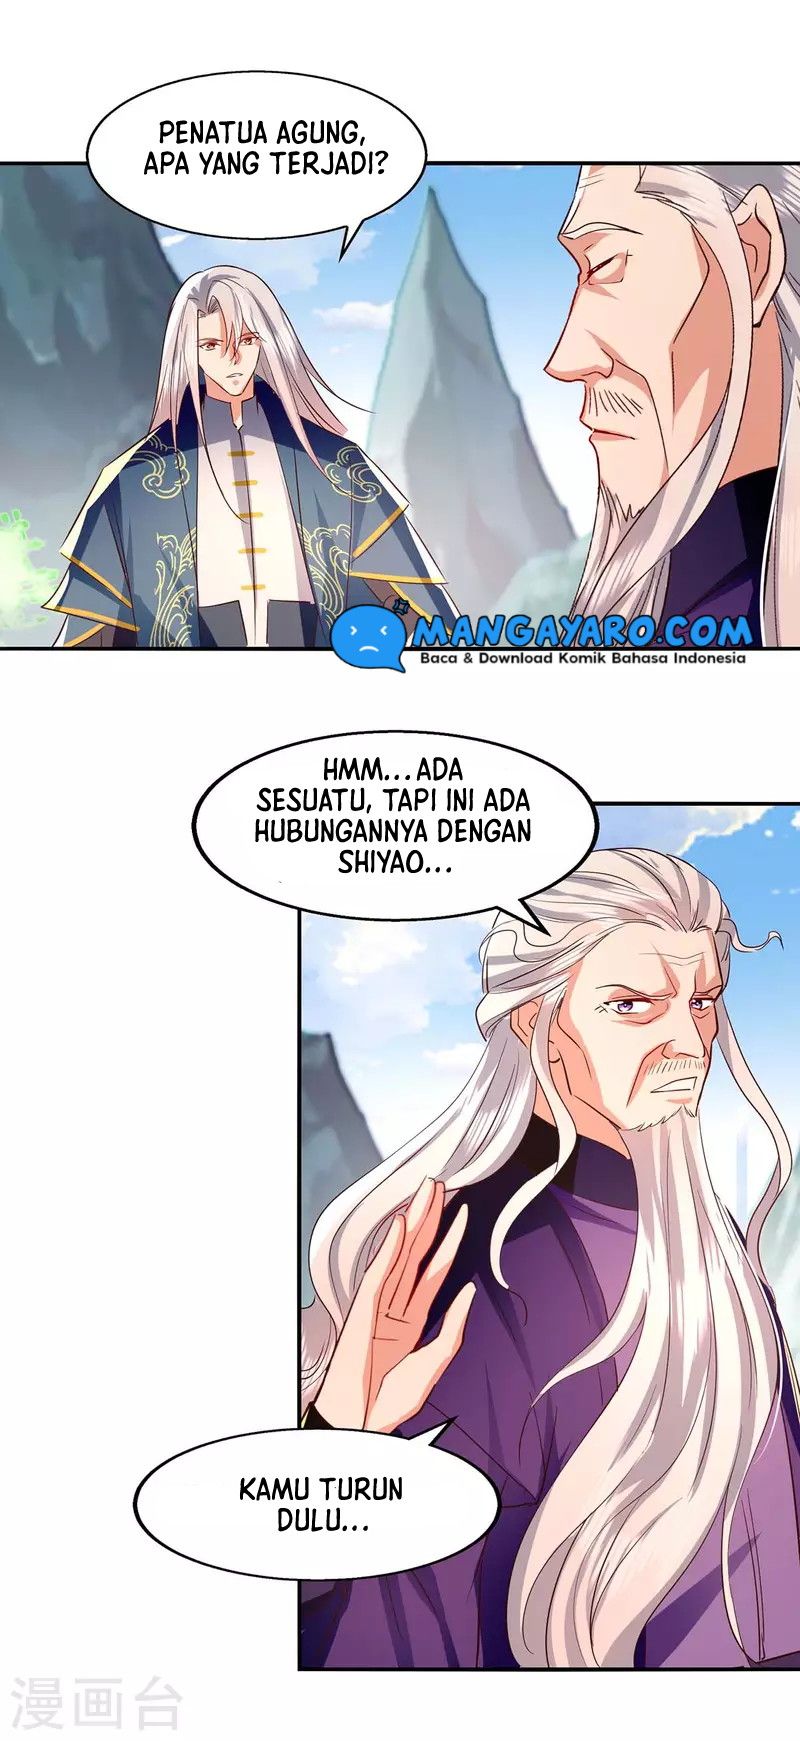 Against The Heaven Supreme (Heaven Guards) Chapter 95 - 155